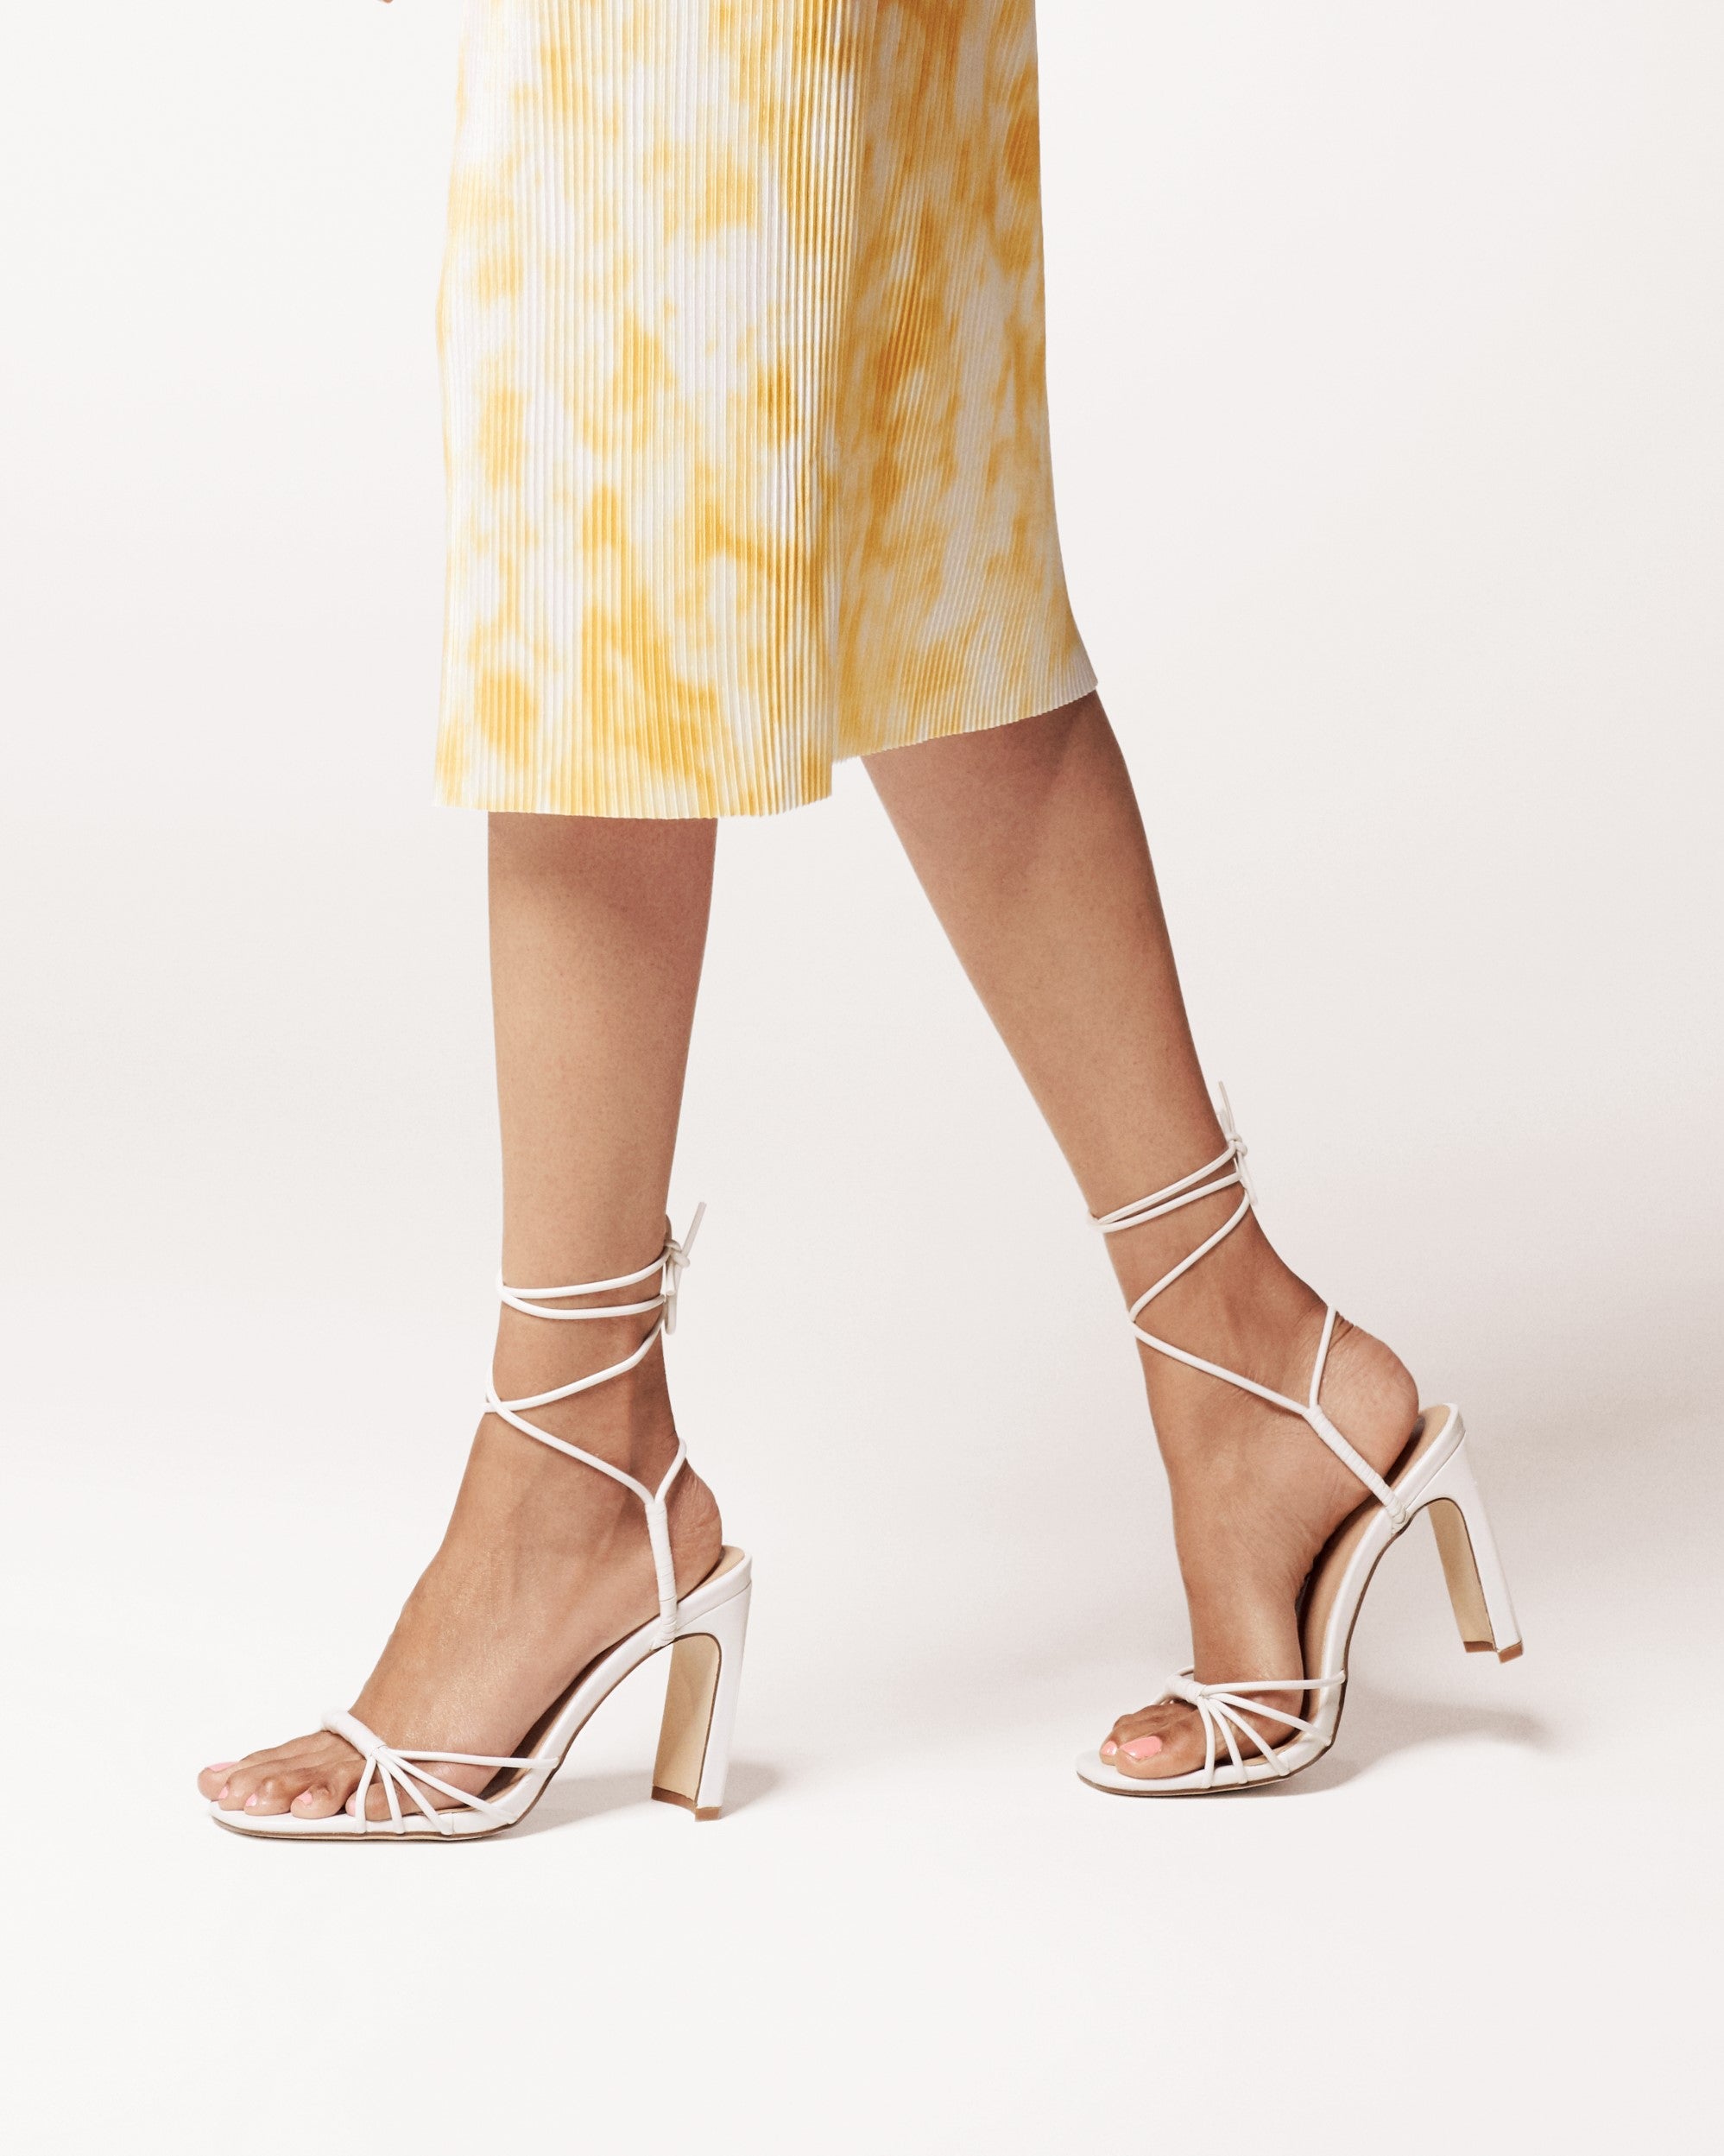 Therapy Shoes Bexley White | Women's Heels | Sandals | Tie Up 